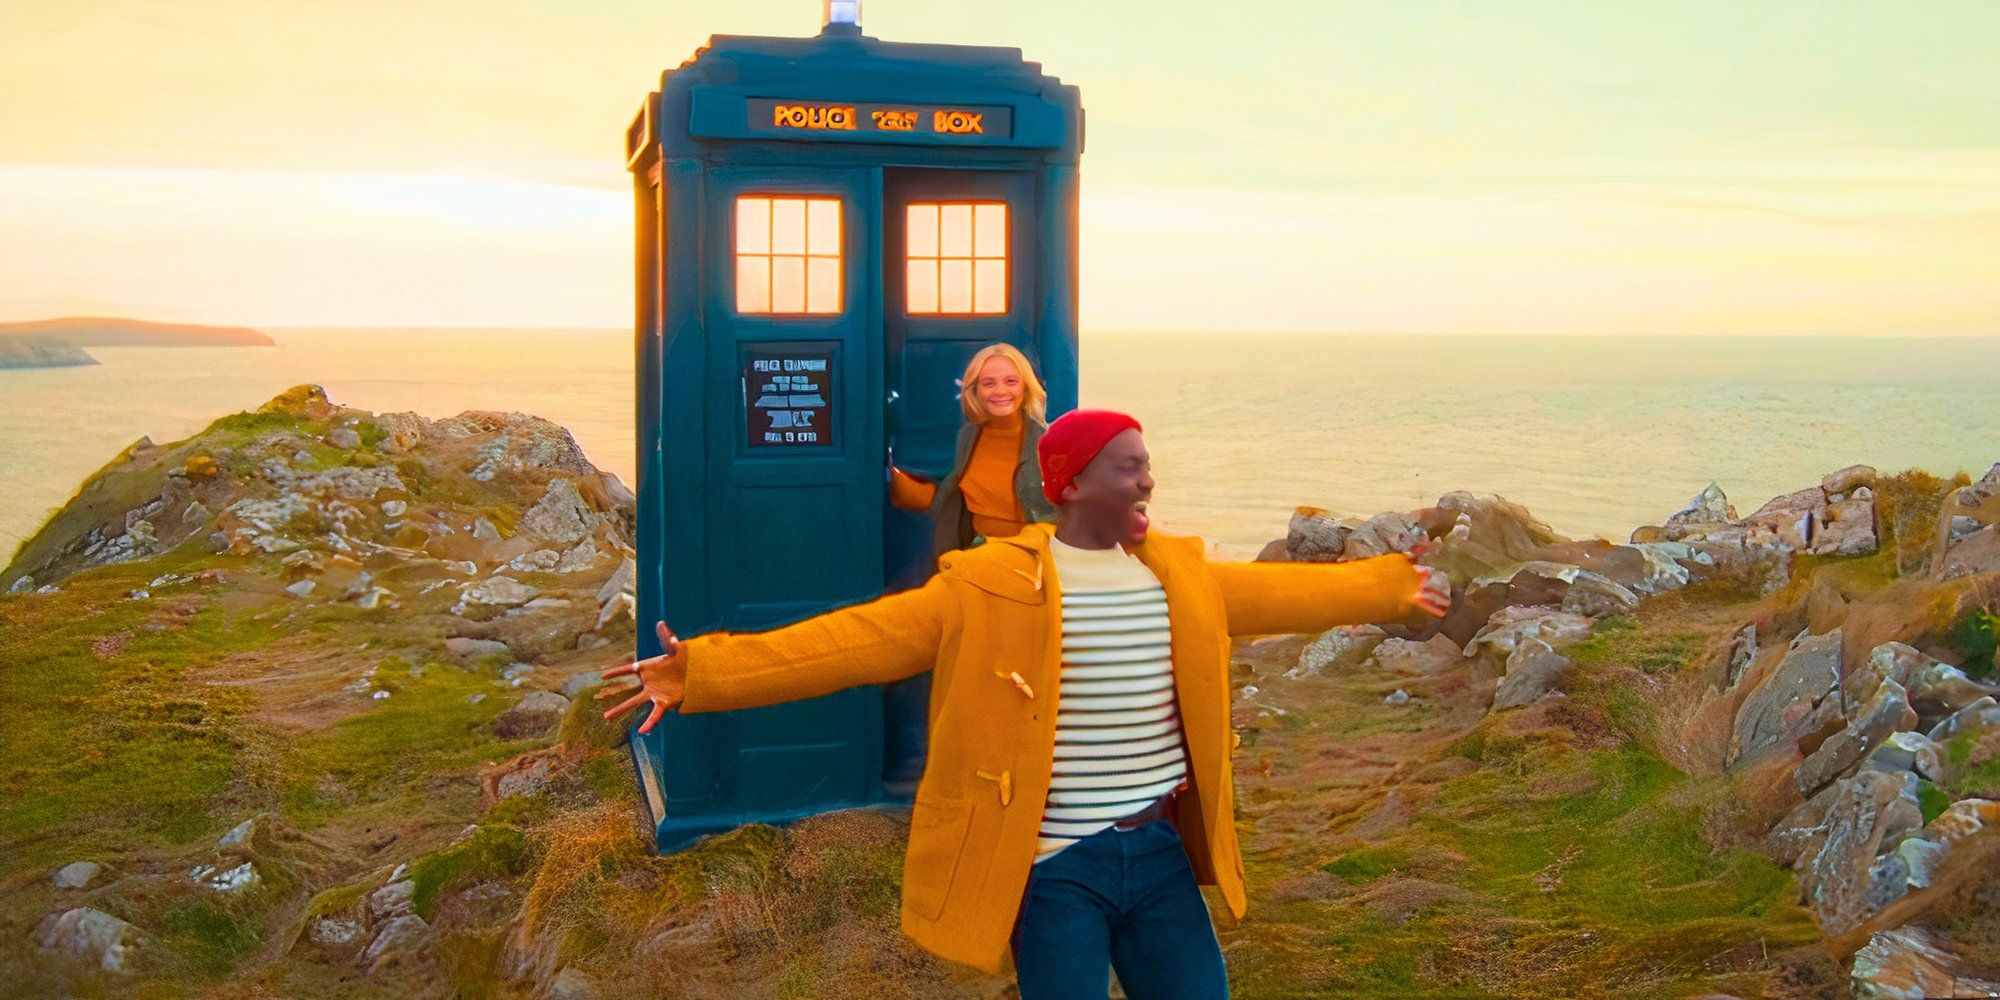 Ncuti Gatwa as the Doctor with his arms spread wide with Millie Gibson as Ruby Sunday leaving the TARDIS in Doctor Who.